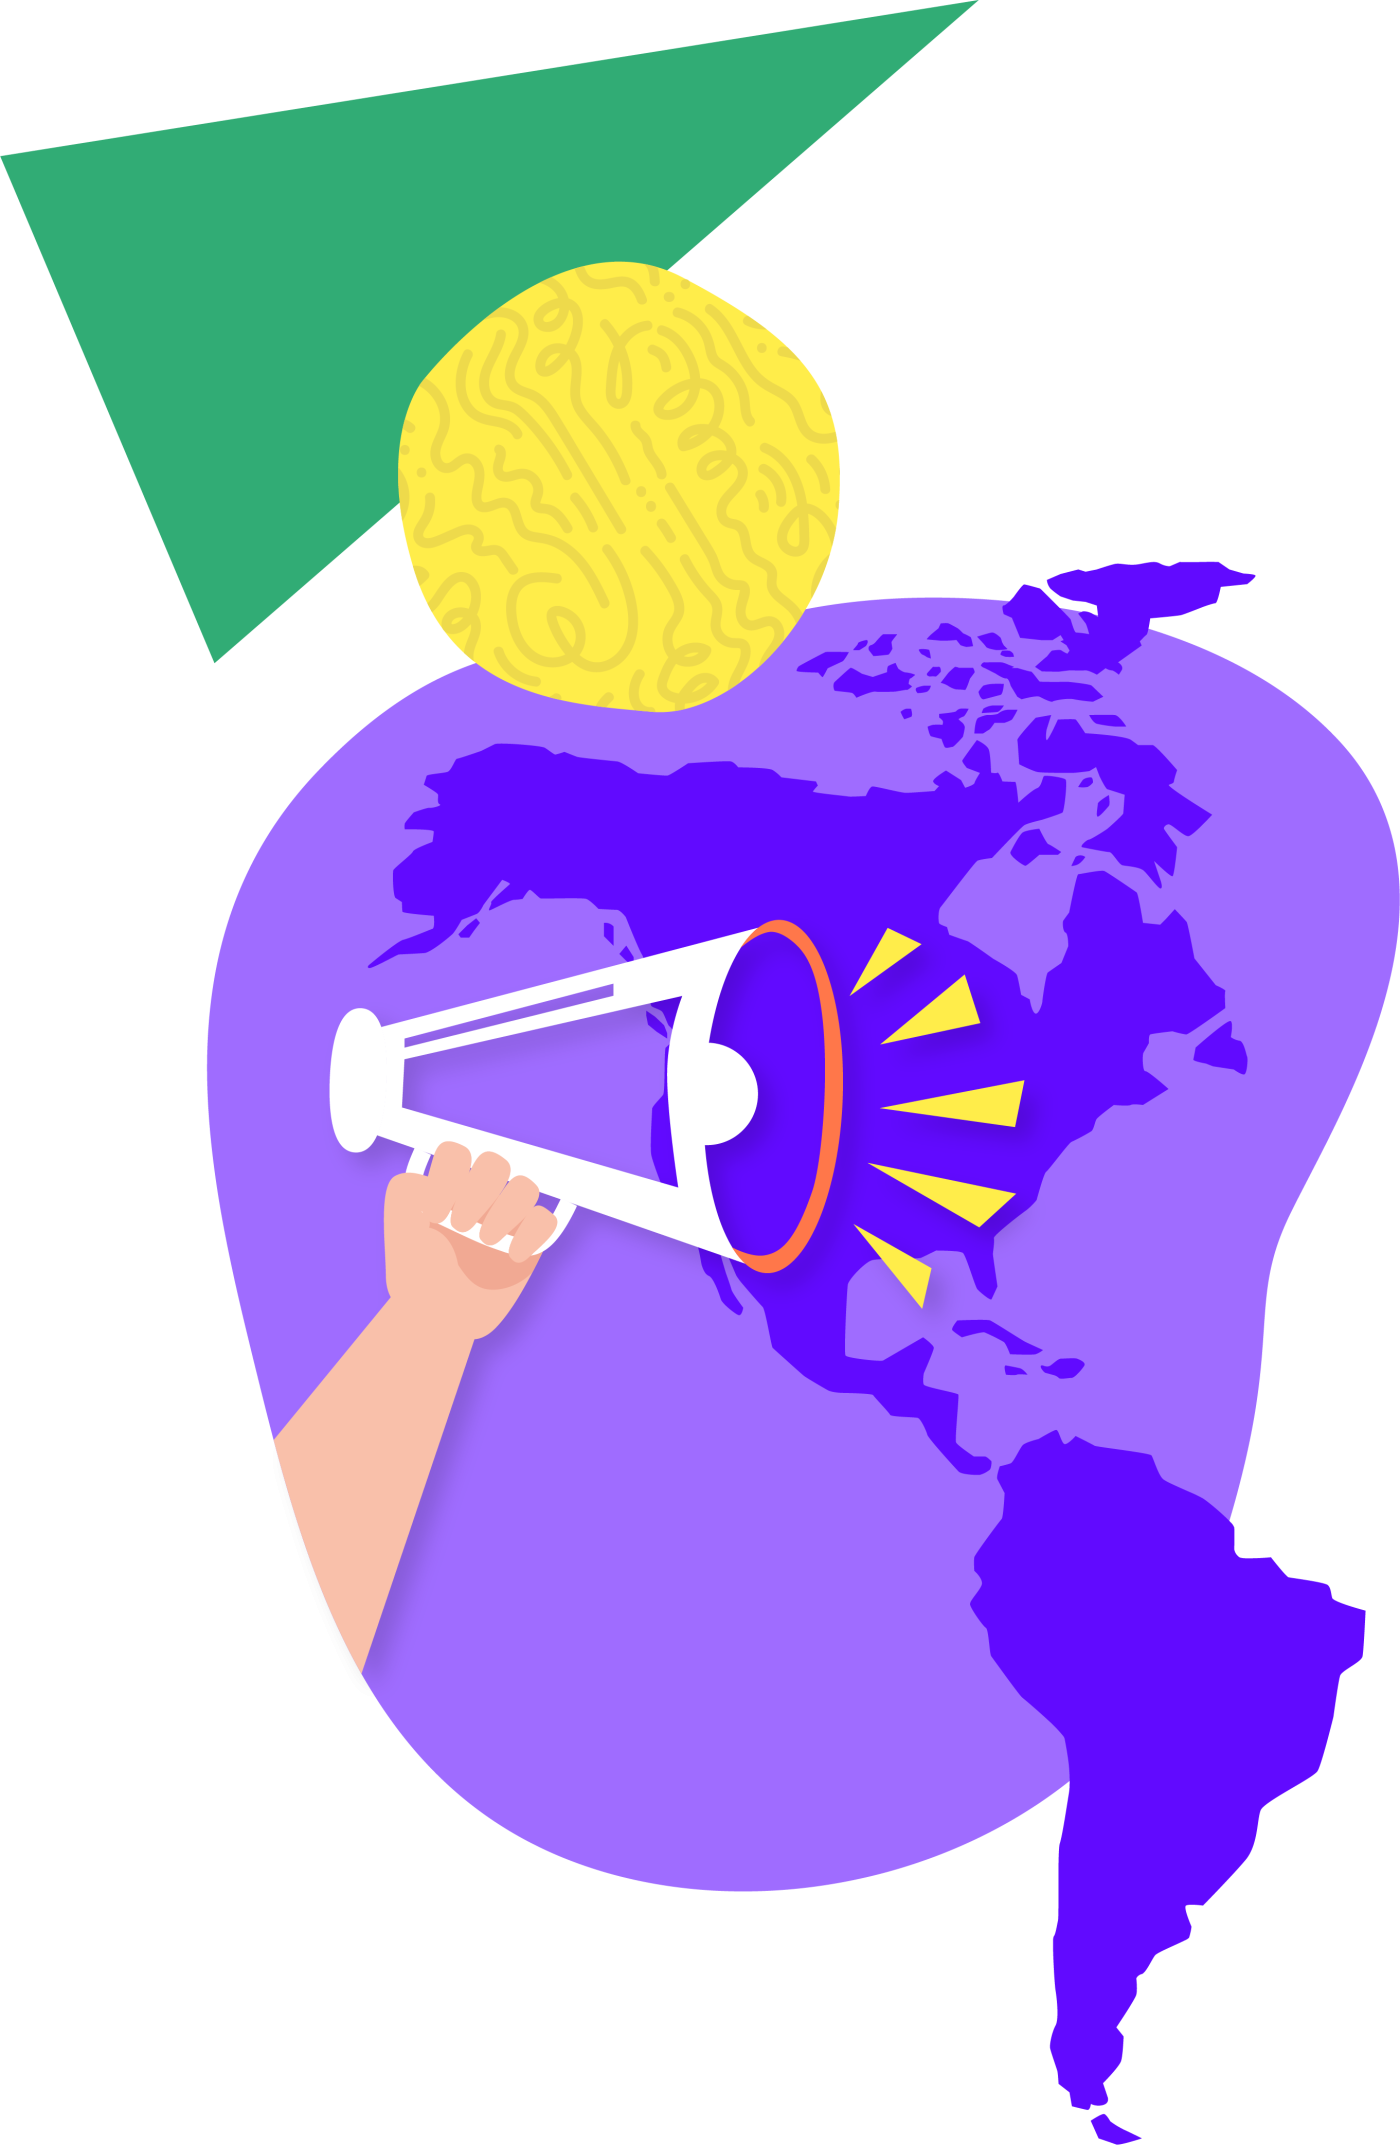 A hand holds a megaphone in front of a purple map of the Americas.